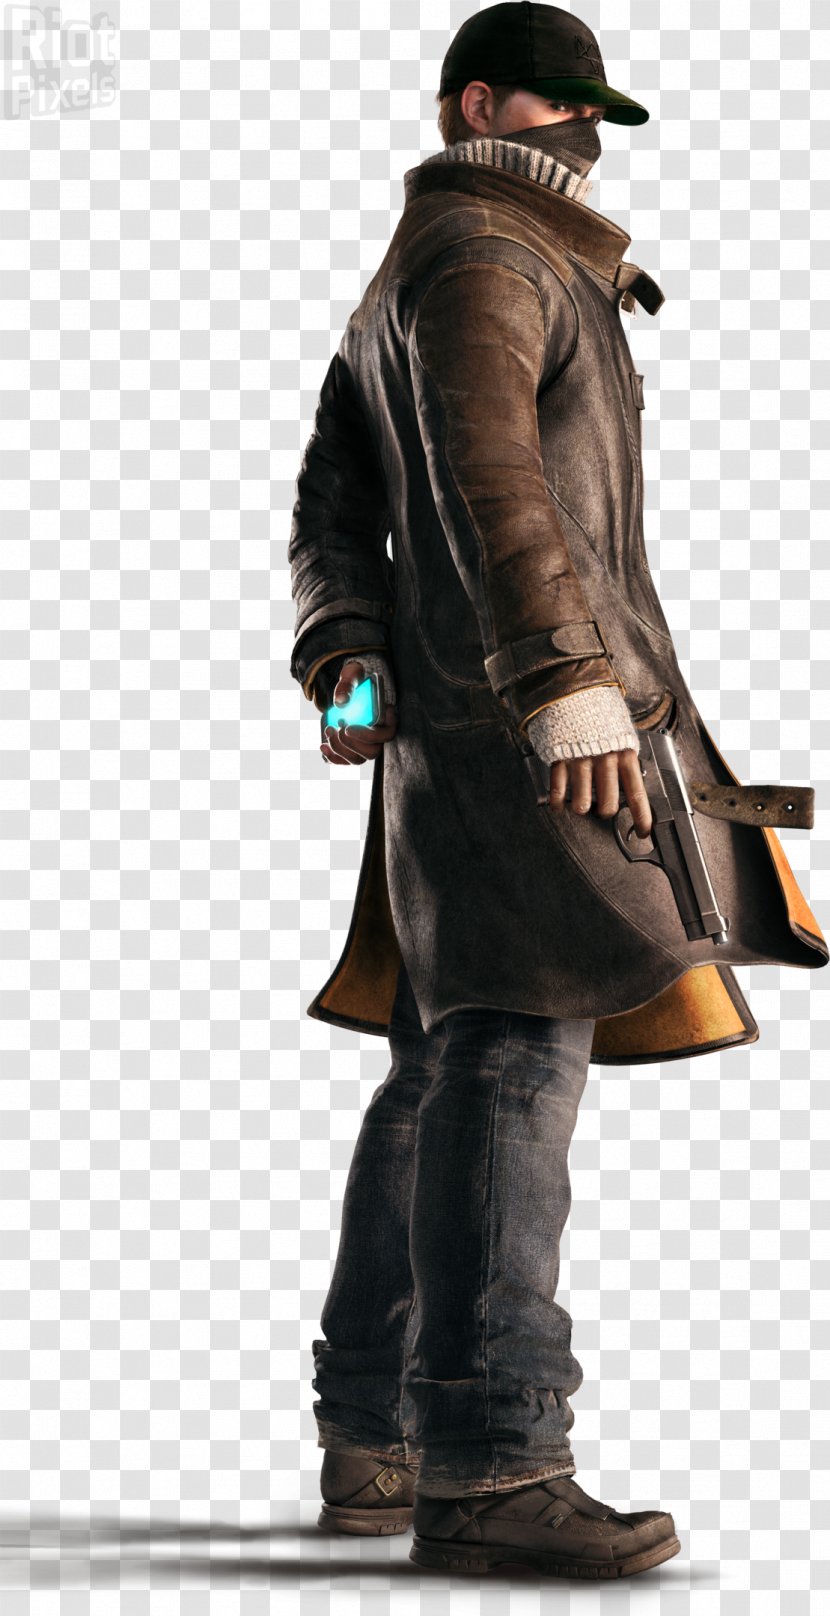 Watch Dogs 2 Aiden Pearce Video Game Security Hacker - Grey Hat Transparent PNG